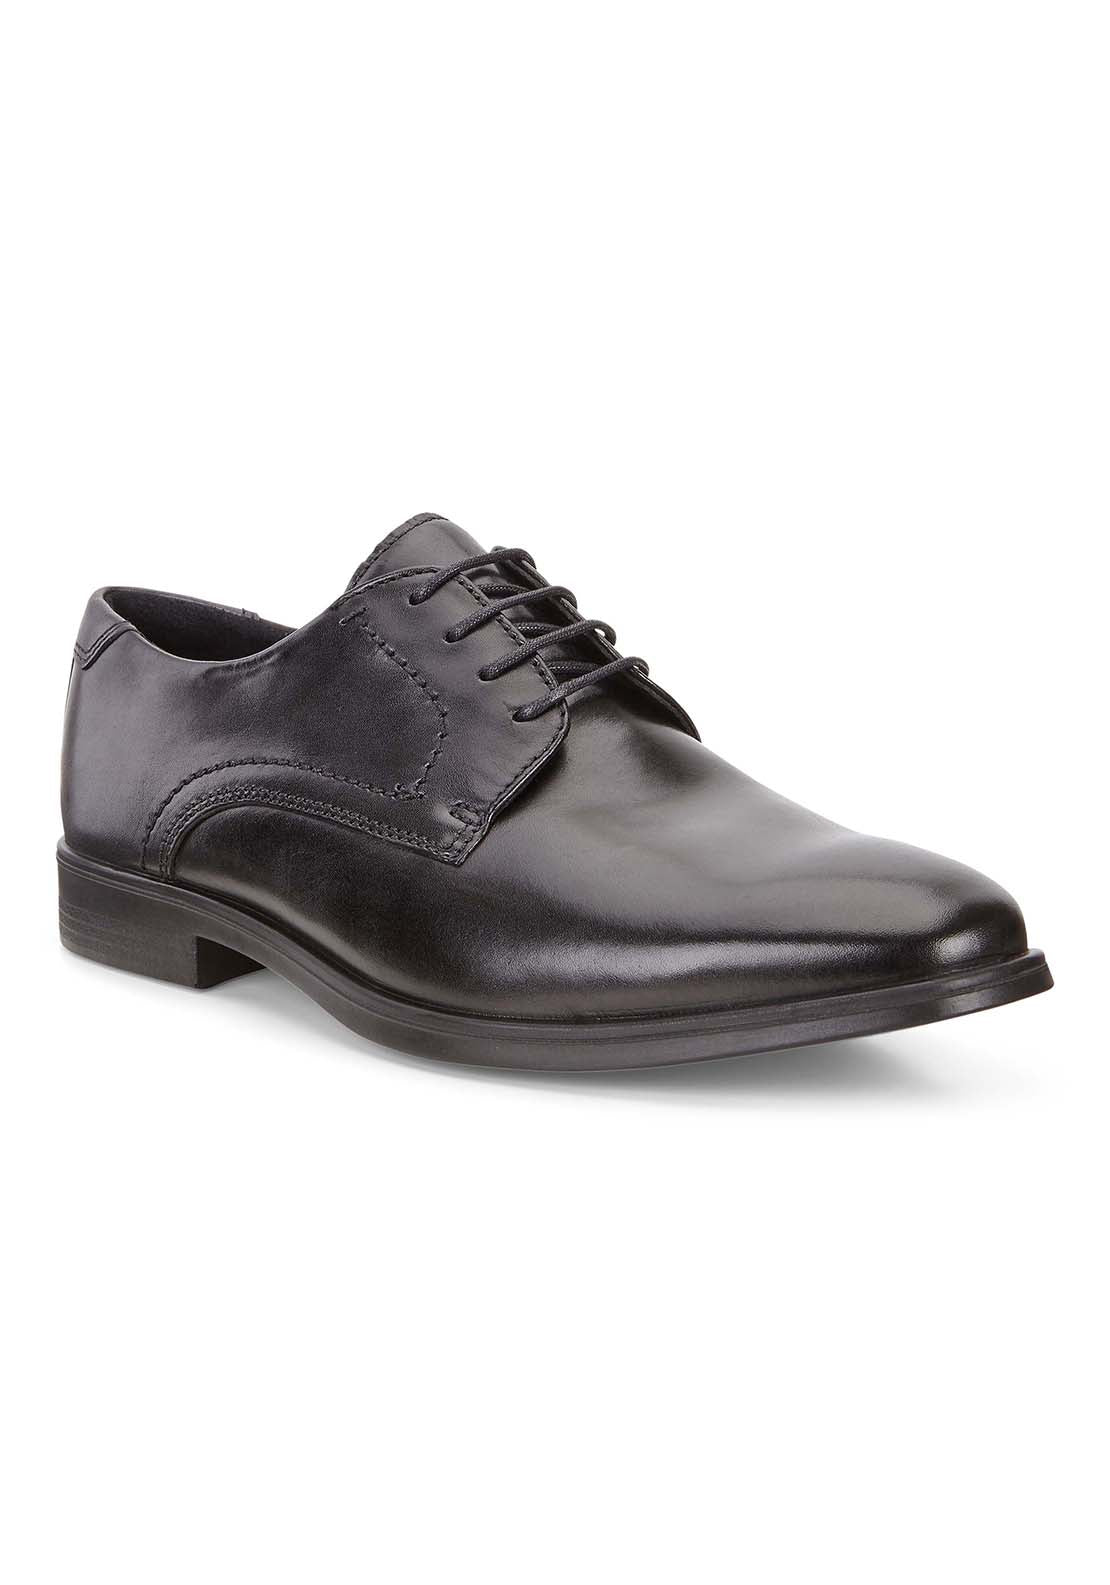 Ecco Melbourne Formal Lace-Up 1 Shaws Department Stores